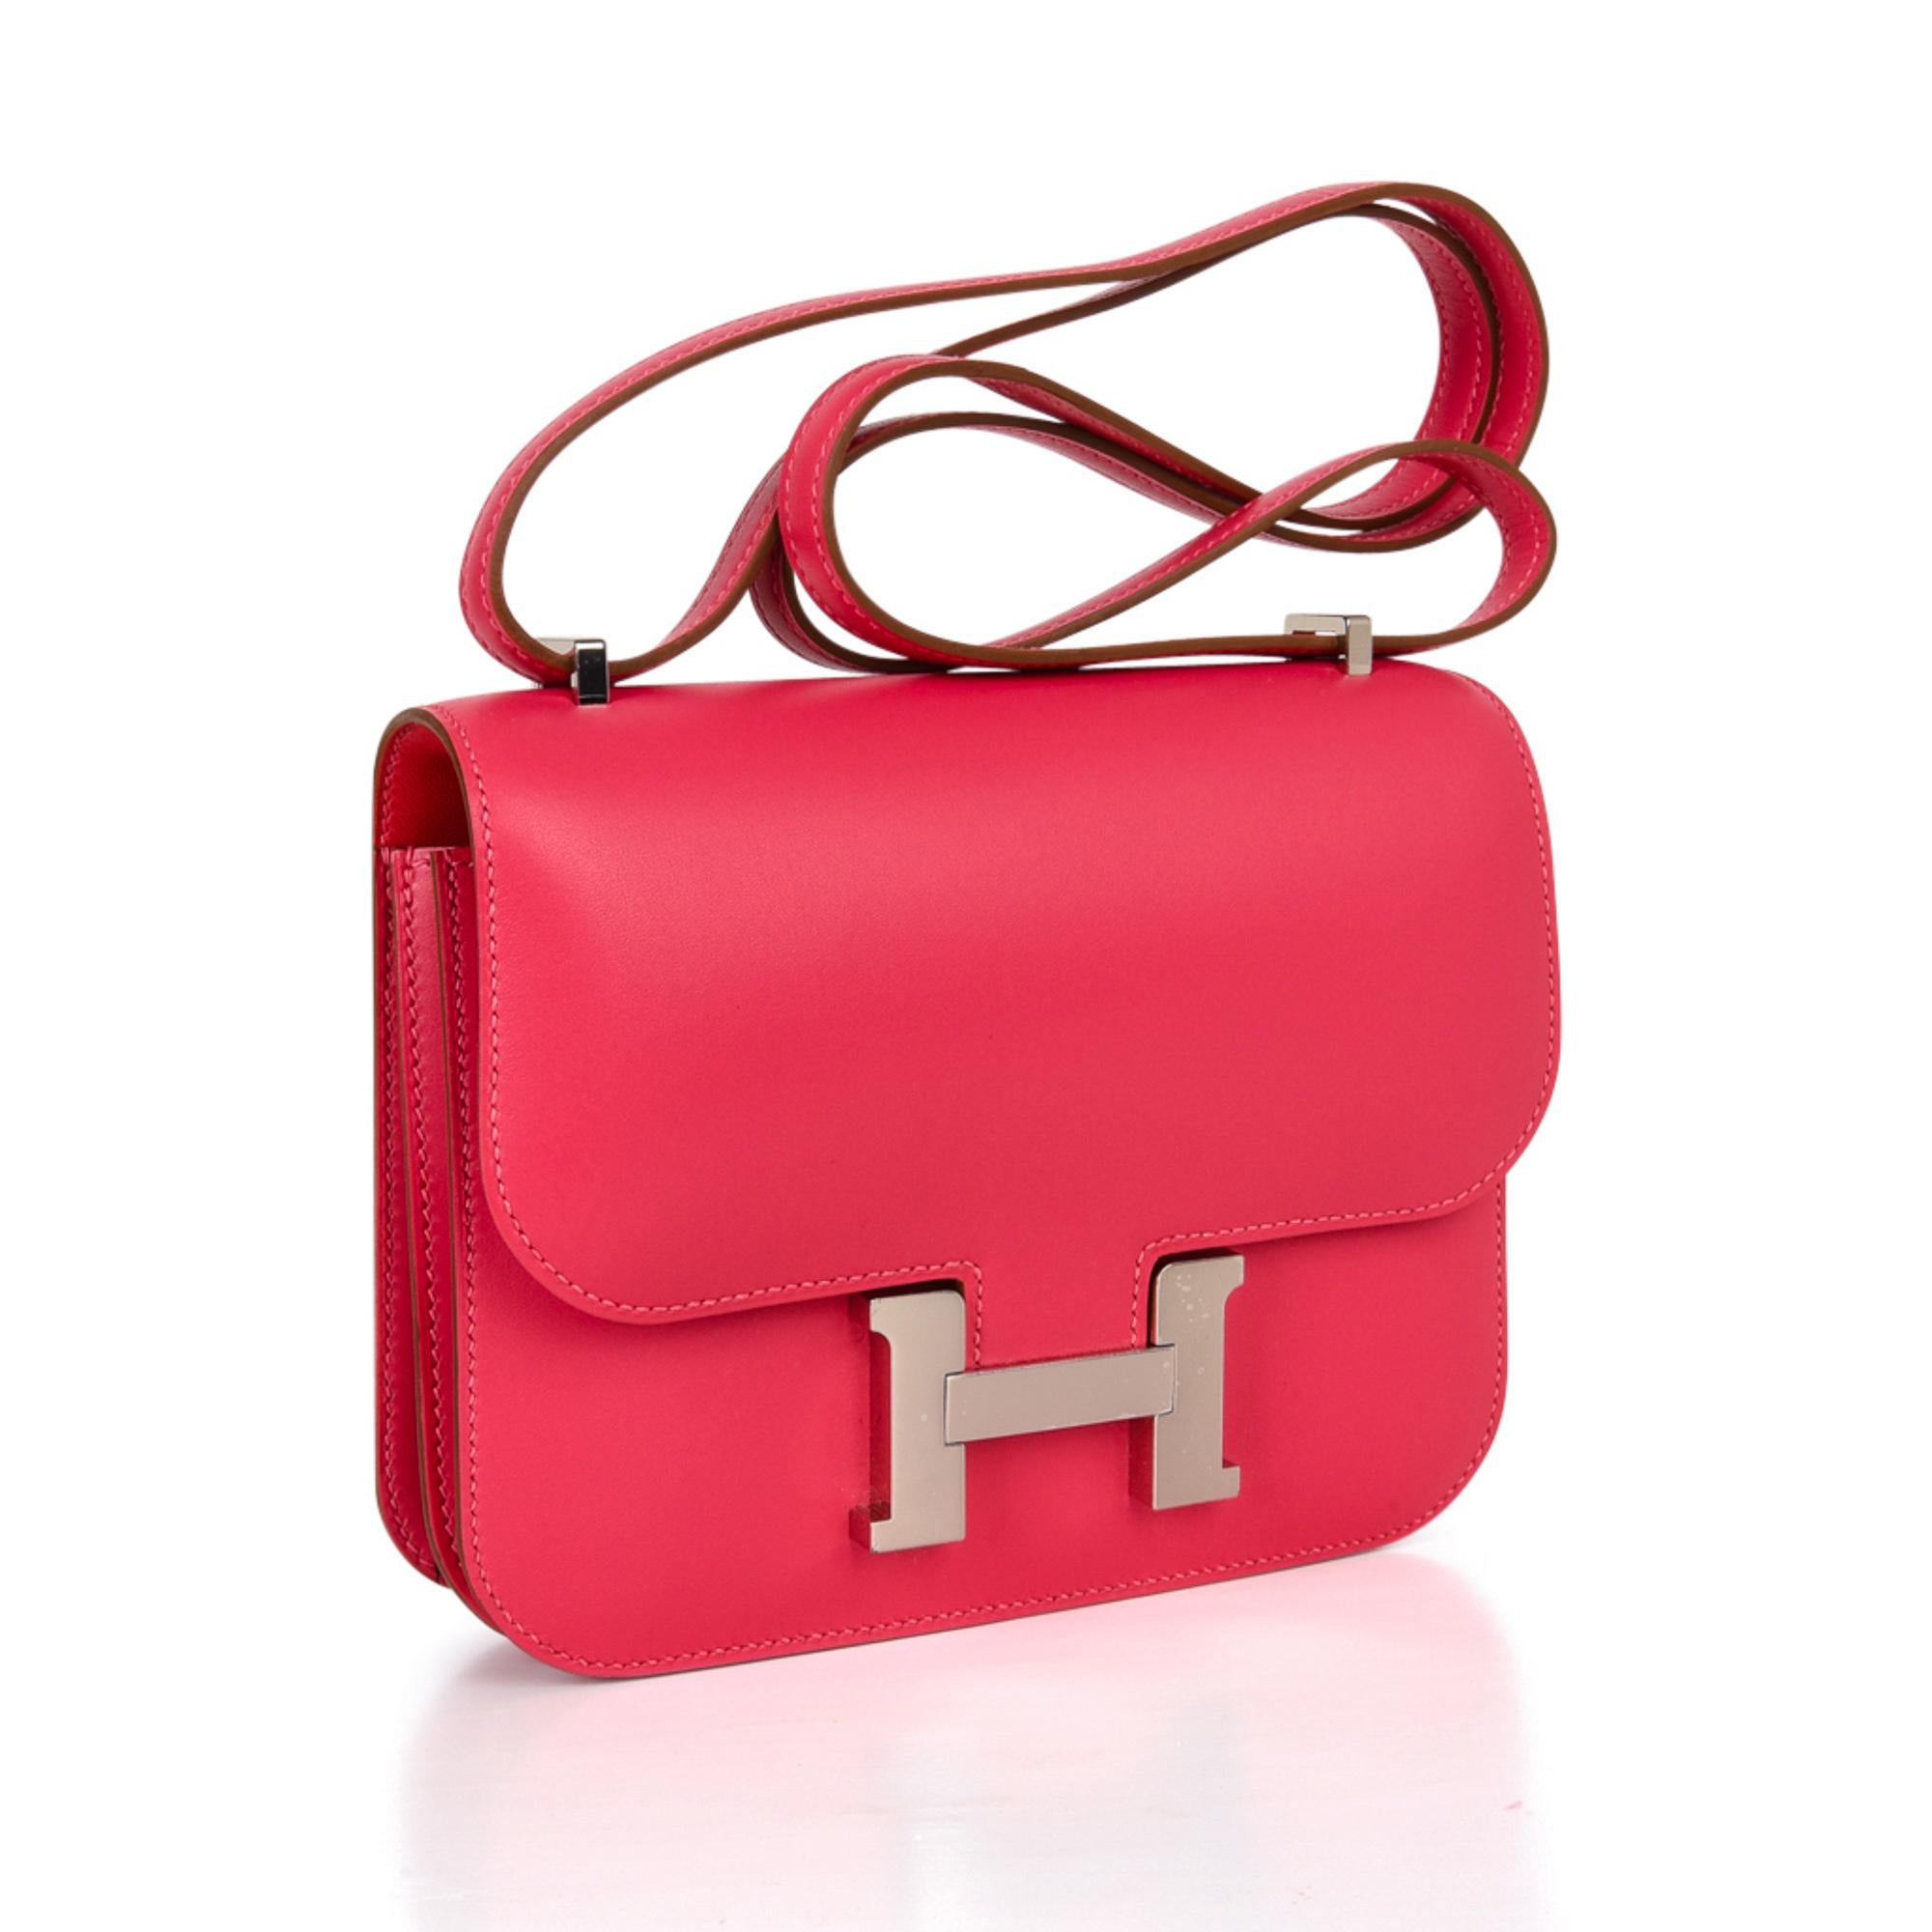 Mightychic offers an Hermes Constance 18 bag featured in Rose Lipstick.
This chic Hermes Mini III pink Constance bag is exquisite in utterly smooth Veau Tadelakt leather.
Fresh with palladium hardware.
HERMES PARIS MADE IN FRANCE is stamped on front